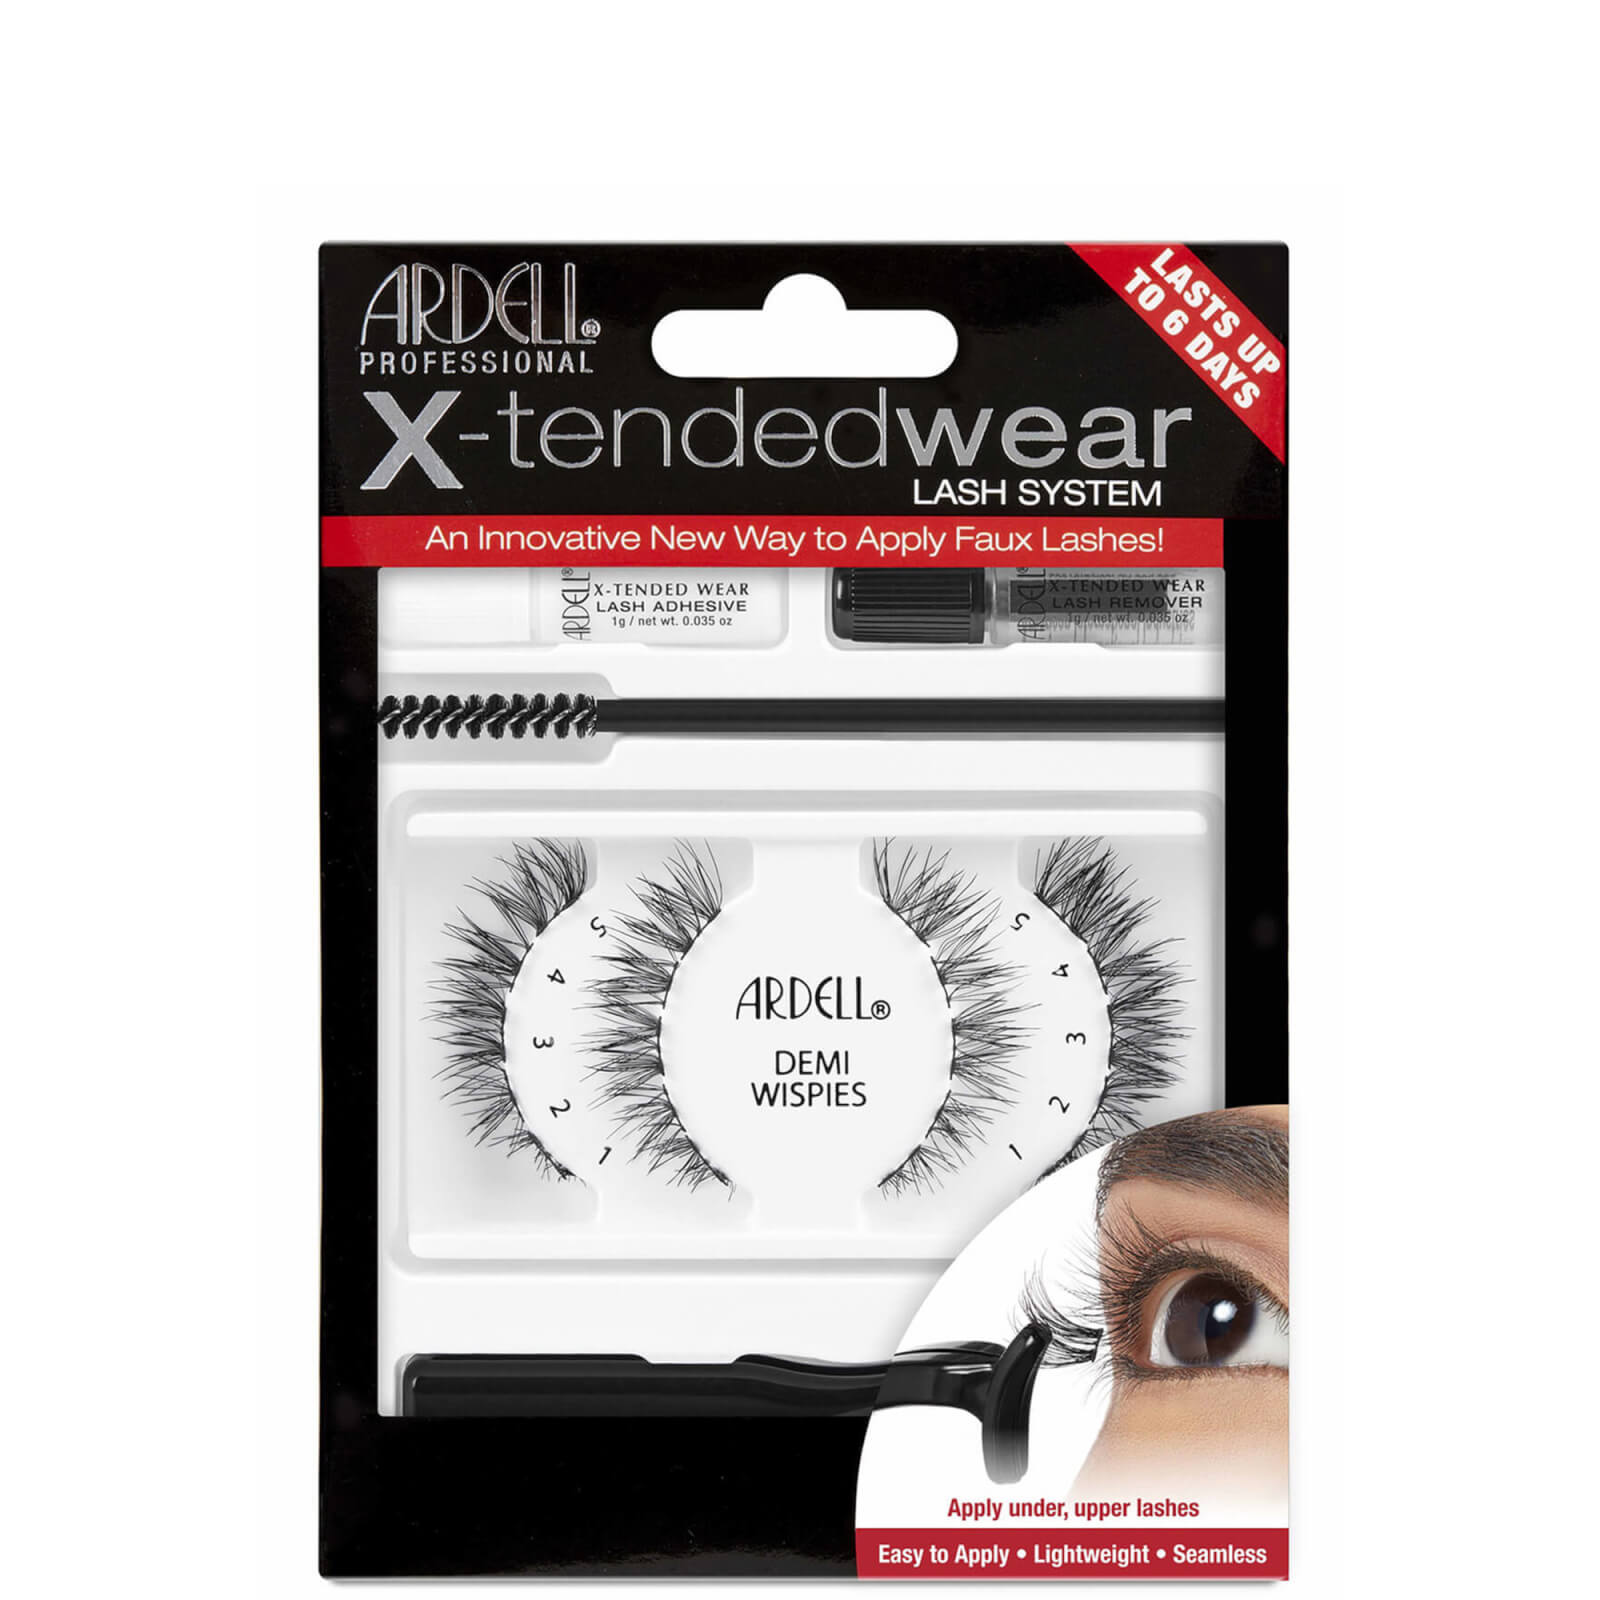 Image of Ardell X-Tended Wear Demi Wispies ciglia finte 2 g